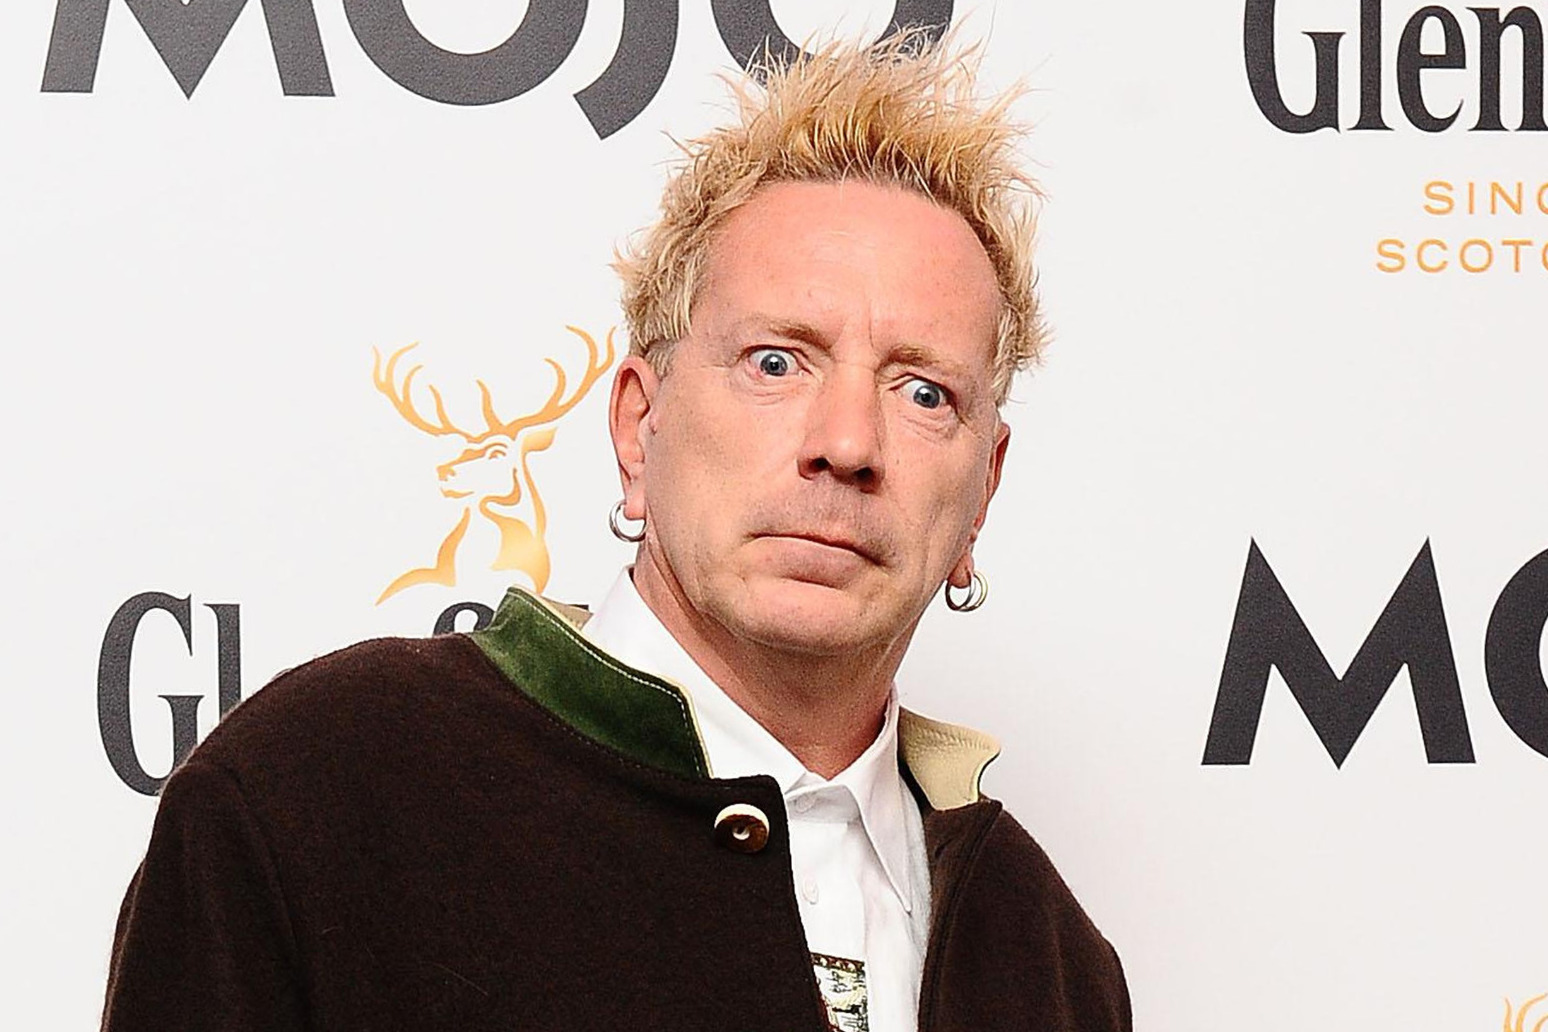 John Lydon on raising awareness about wife’s Alzheimer’s with Eurovision entry 